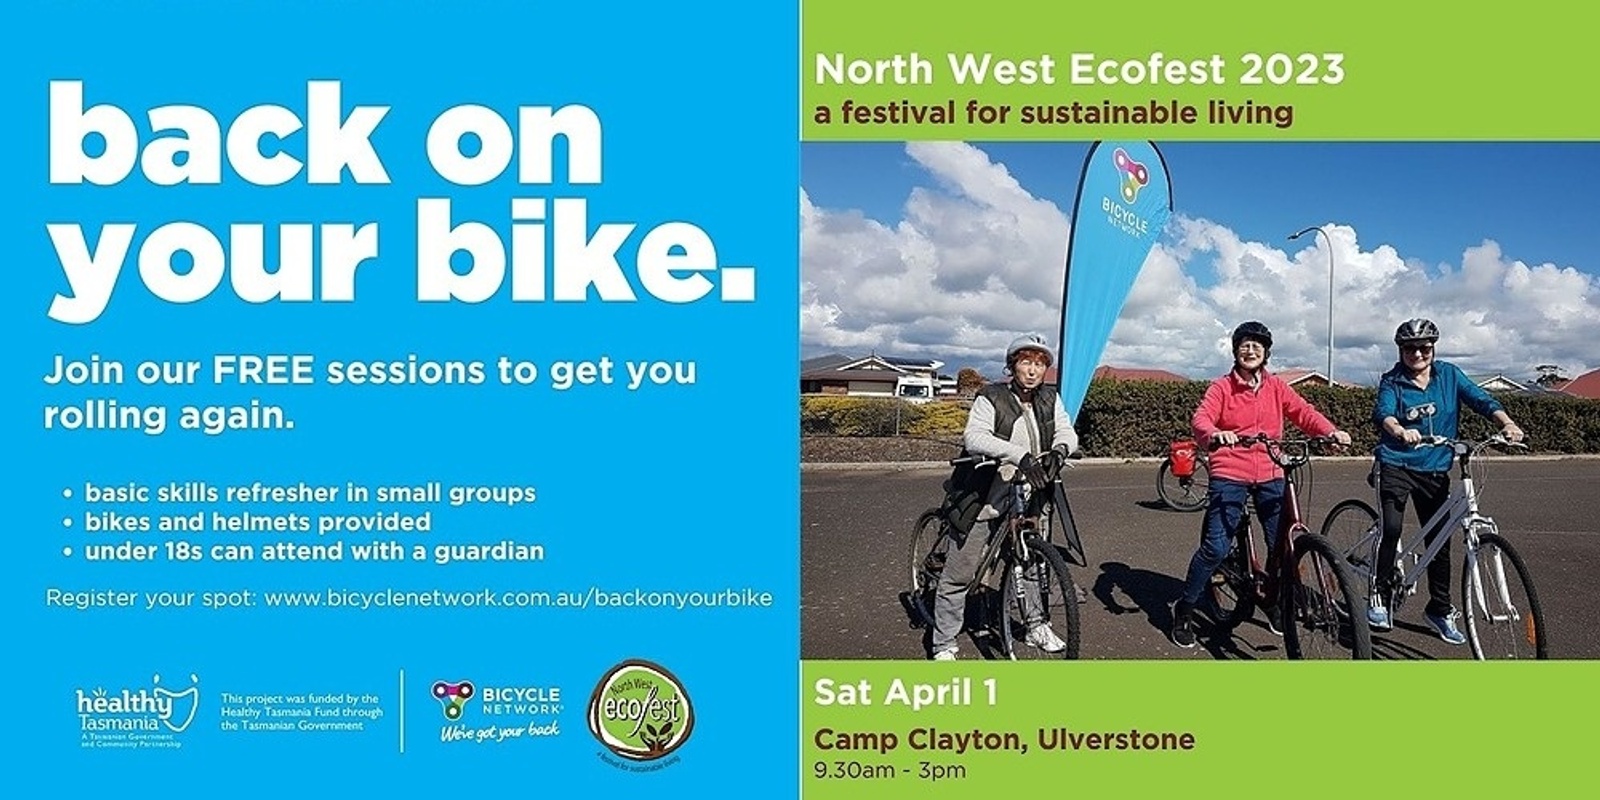 Banner image for Back on your bike. Ecofest (1pm)